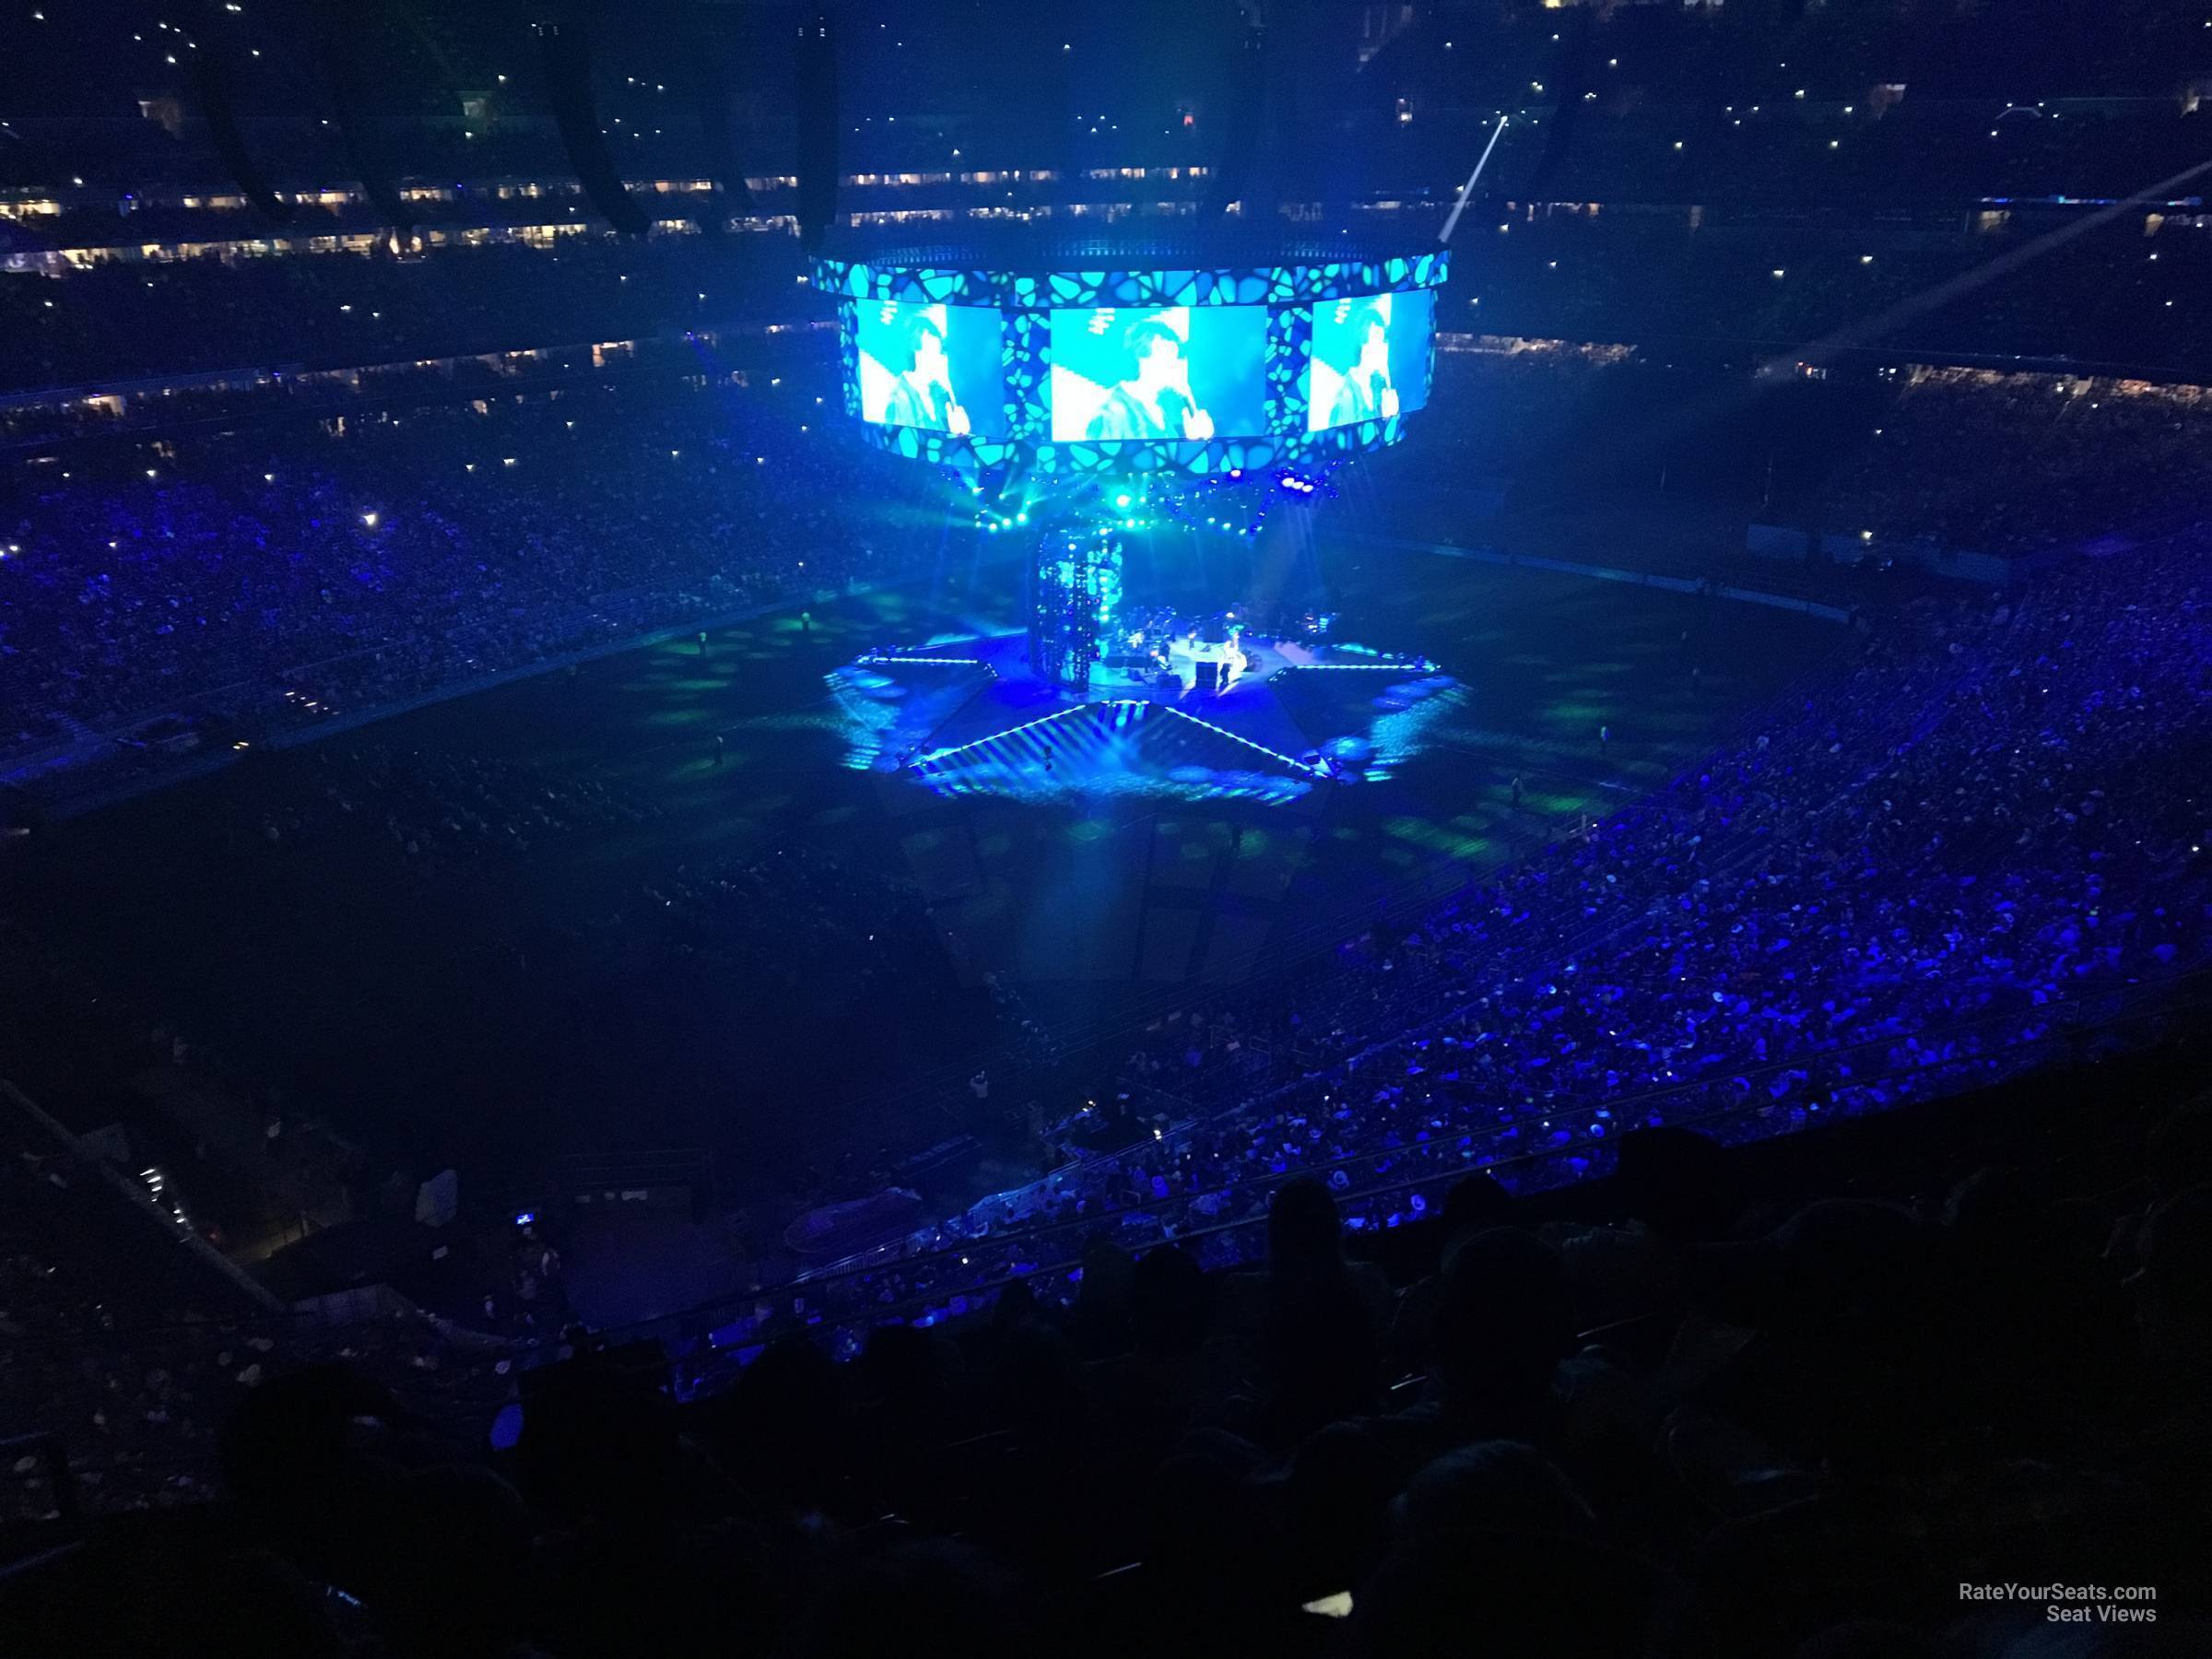 section 514, row m seat view  for concert - nrg stadium